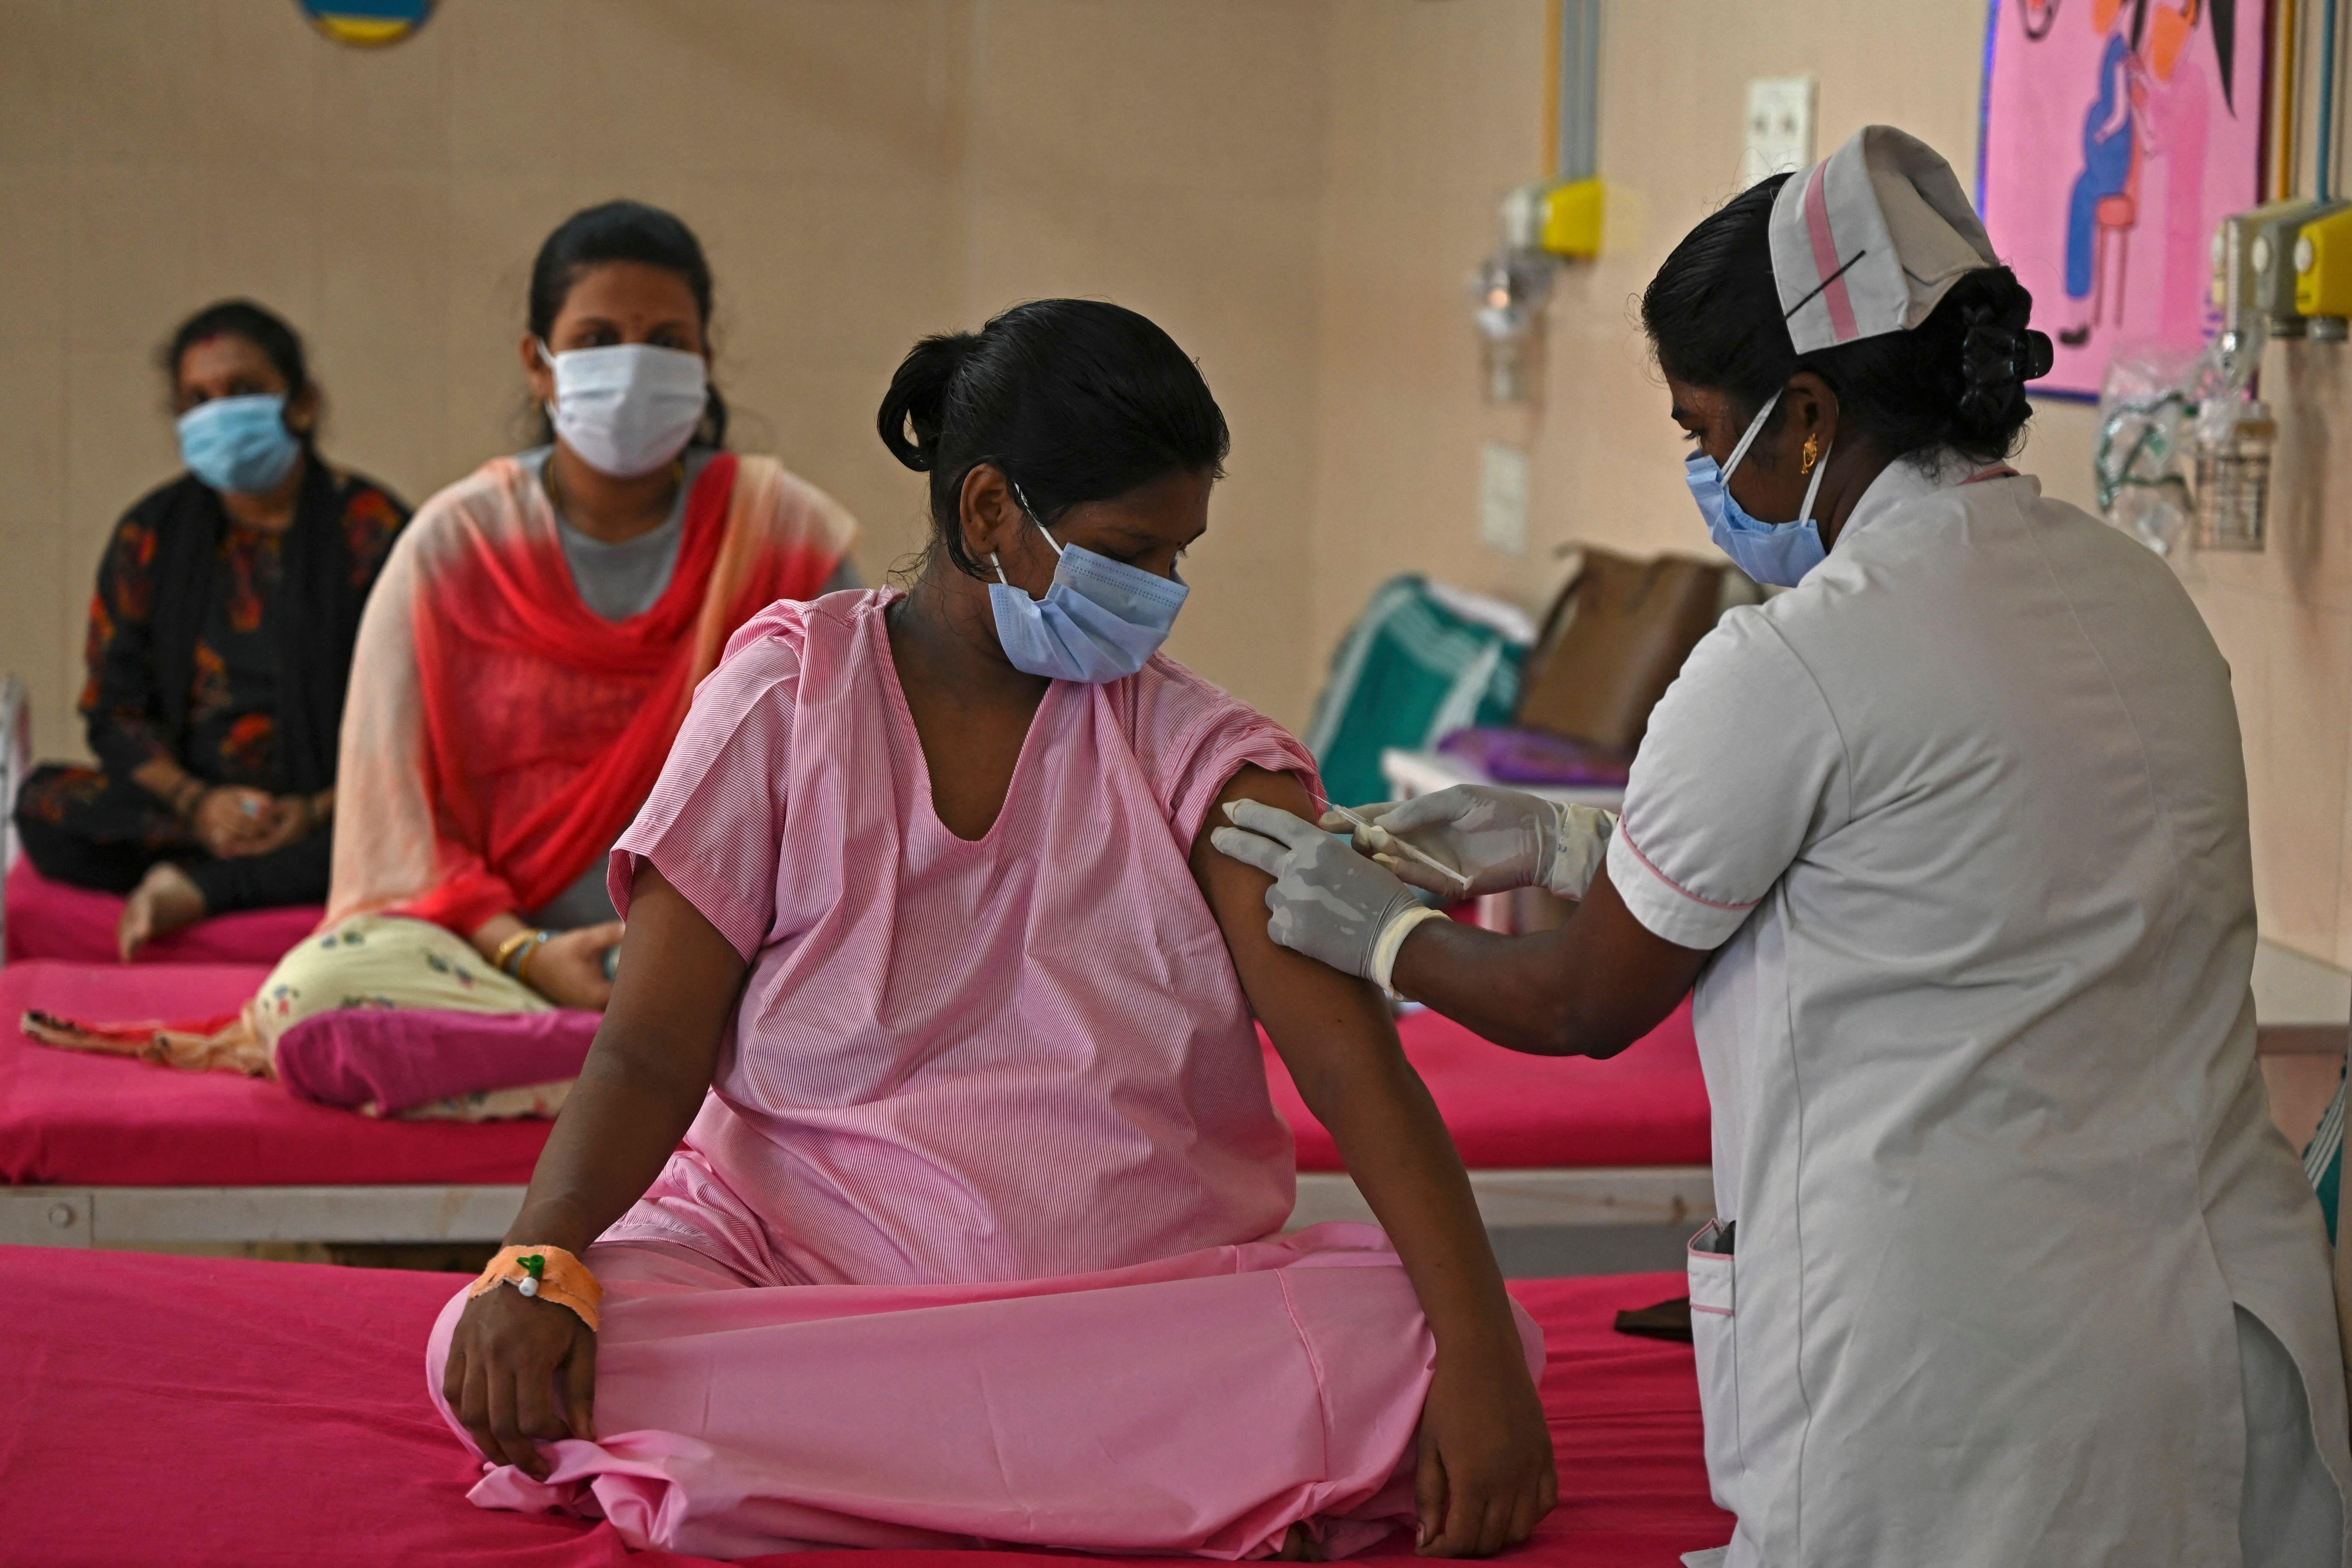 A pregnant woman gets inoculated with a dose of the Covaxine vaccine against the Covid-19 coronavirus at a government maternity and child hospital in Chennai on July 5, 2021. (Photo by Arun SANKAR / AFP) (Photo by ARUN SANKAR/AFP via Getty Images)